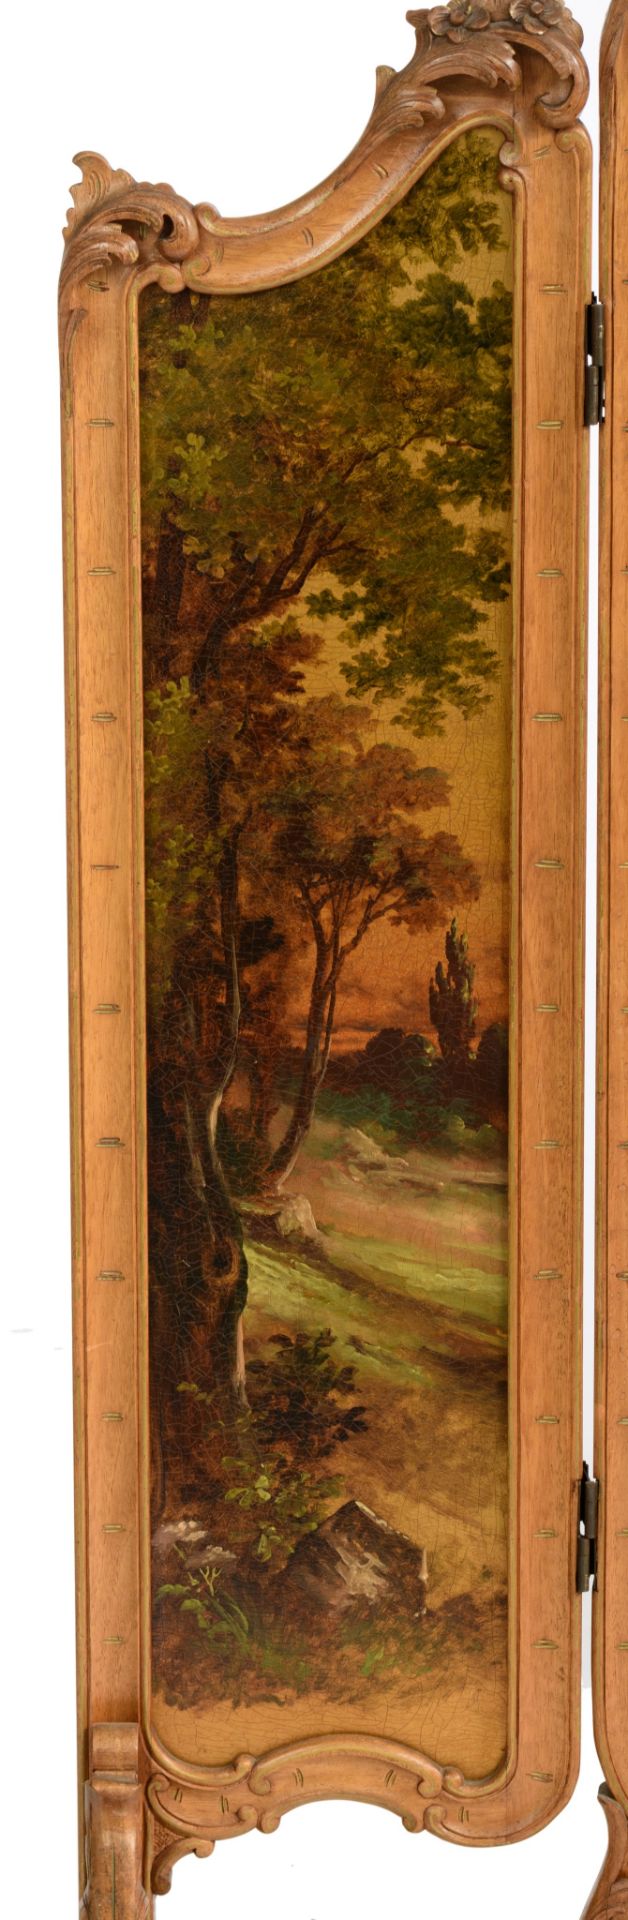 A Rococo style fire screen, with a romantic scene in the 'Vernis Martin' manner, H 148 - W 52 - 106 - Image 5 of 7